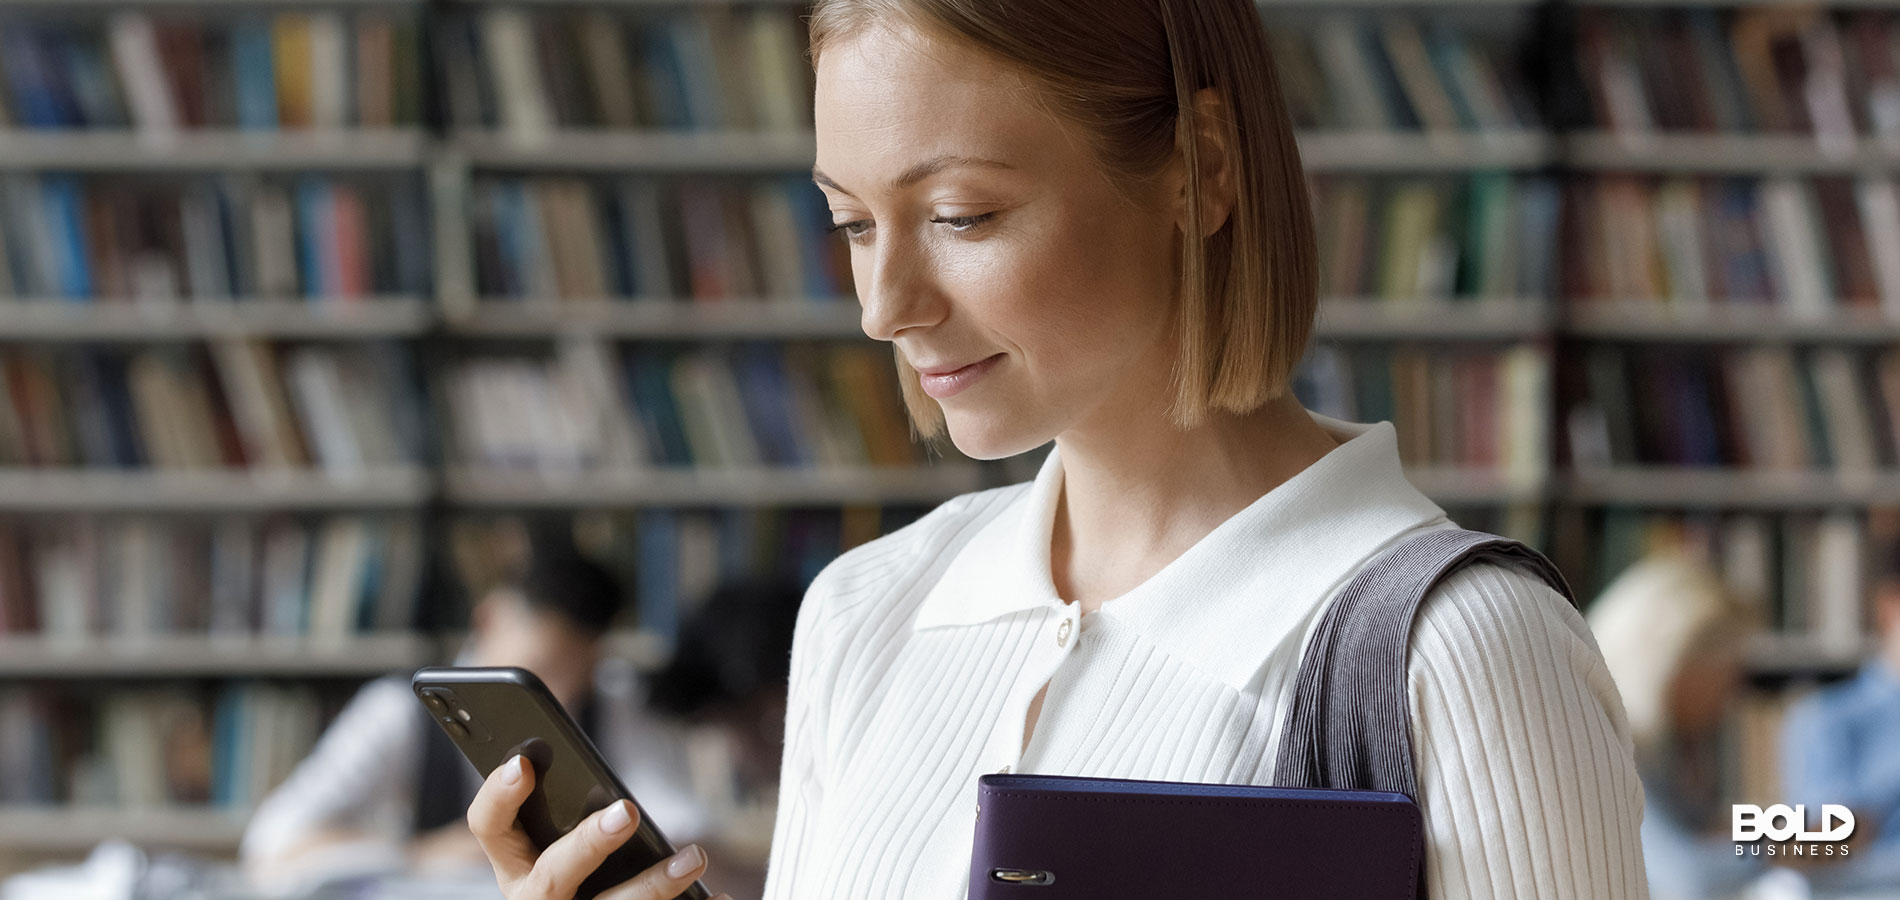 A student reading a textbook on her phone